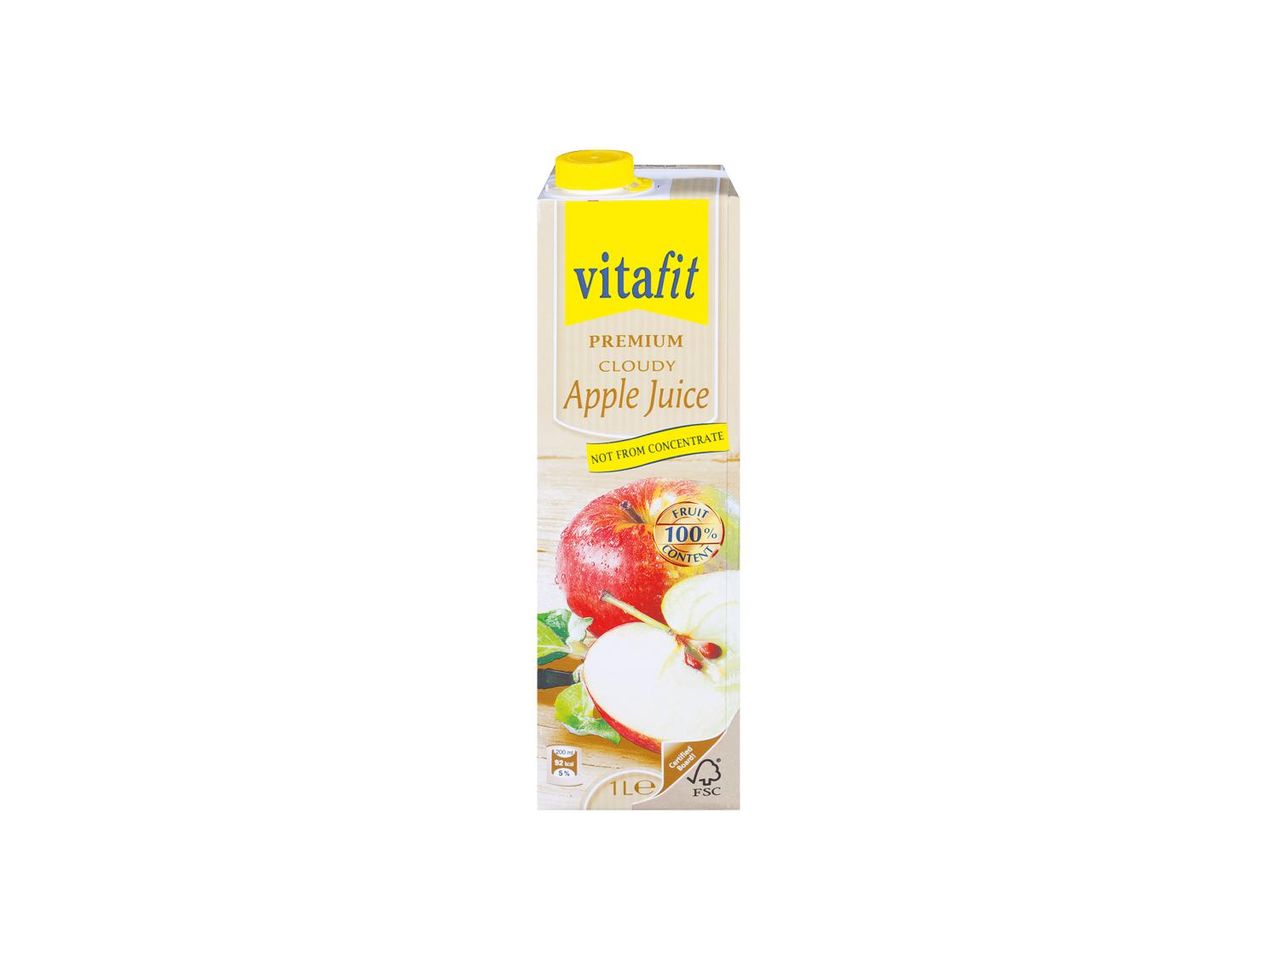 Go to full screen view: Vitafit Premium Cloudy Apple Juice Not From Concentrate - Image 1